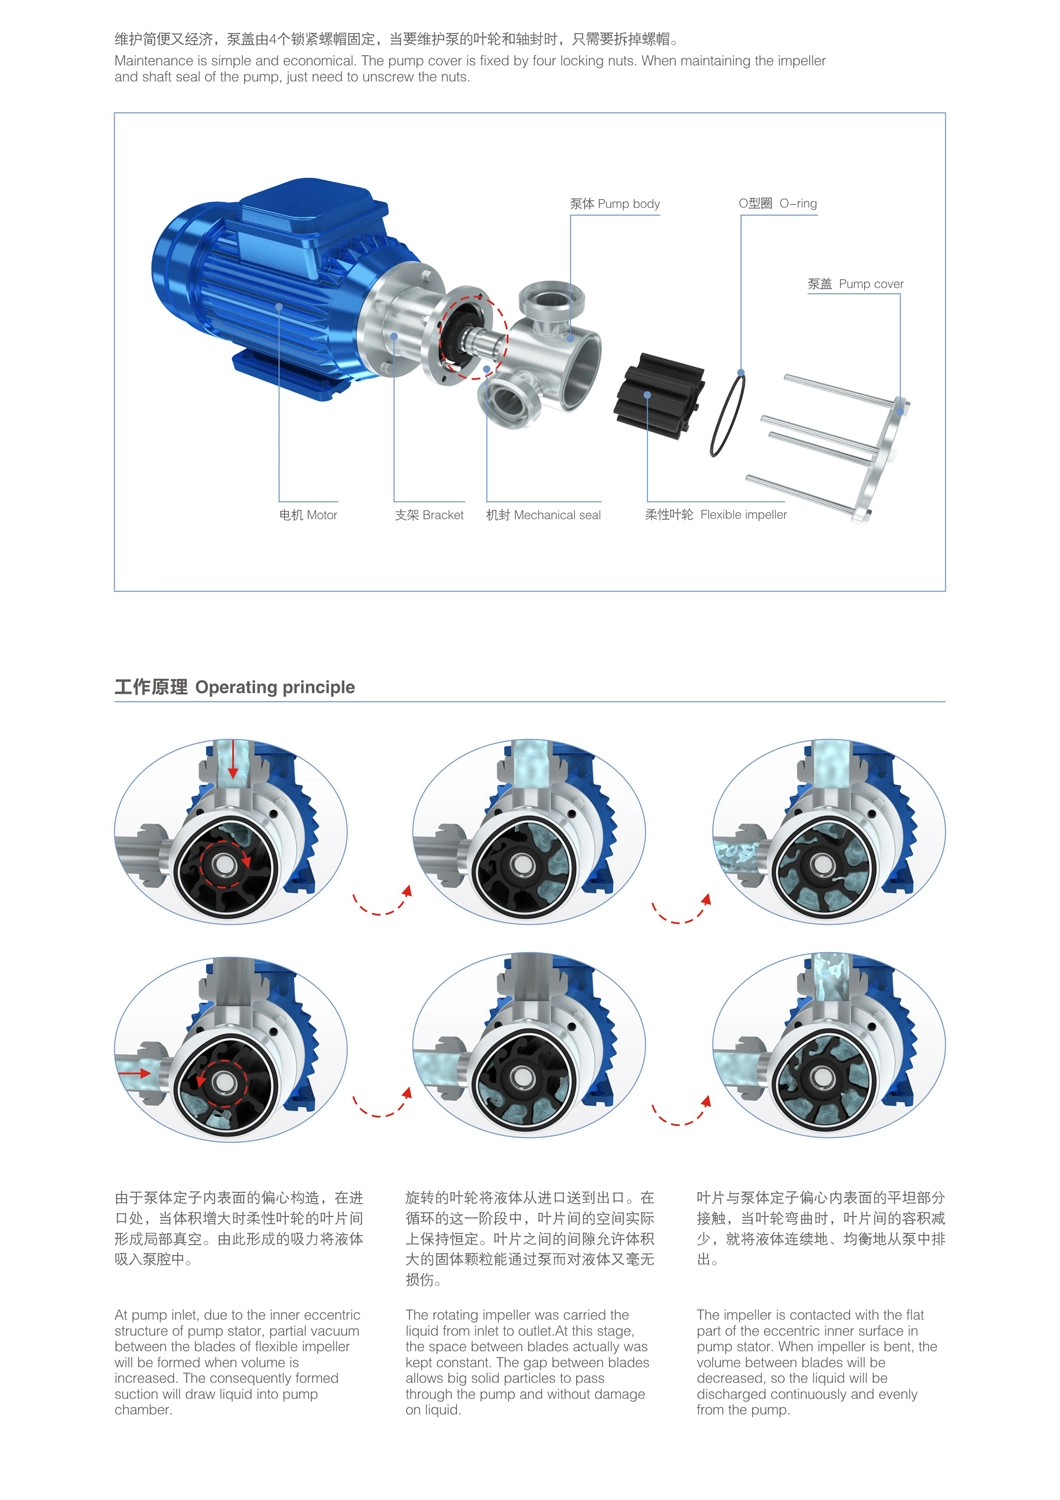 Donjoy Stainless Steel Flexible Impeller Pump Manufacturer in China